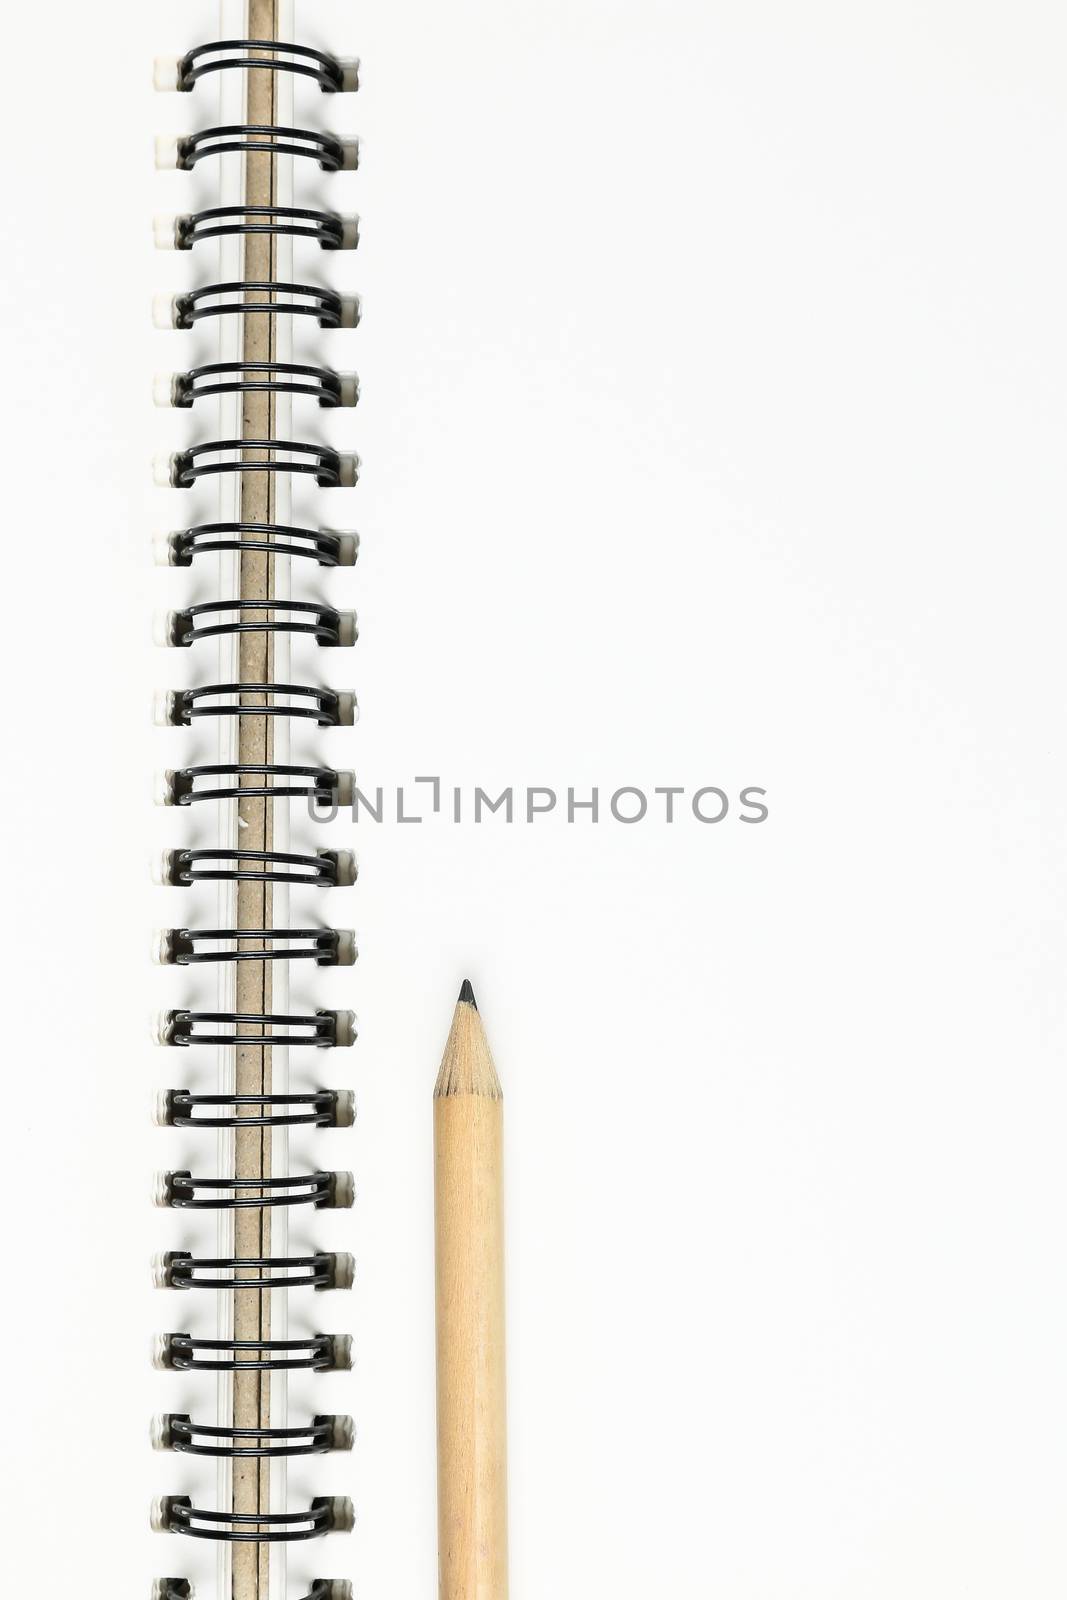 empty pages of opened notebook or sketchbook with pencil on wooden table, business, education, art